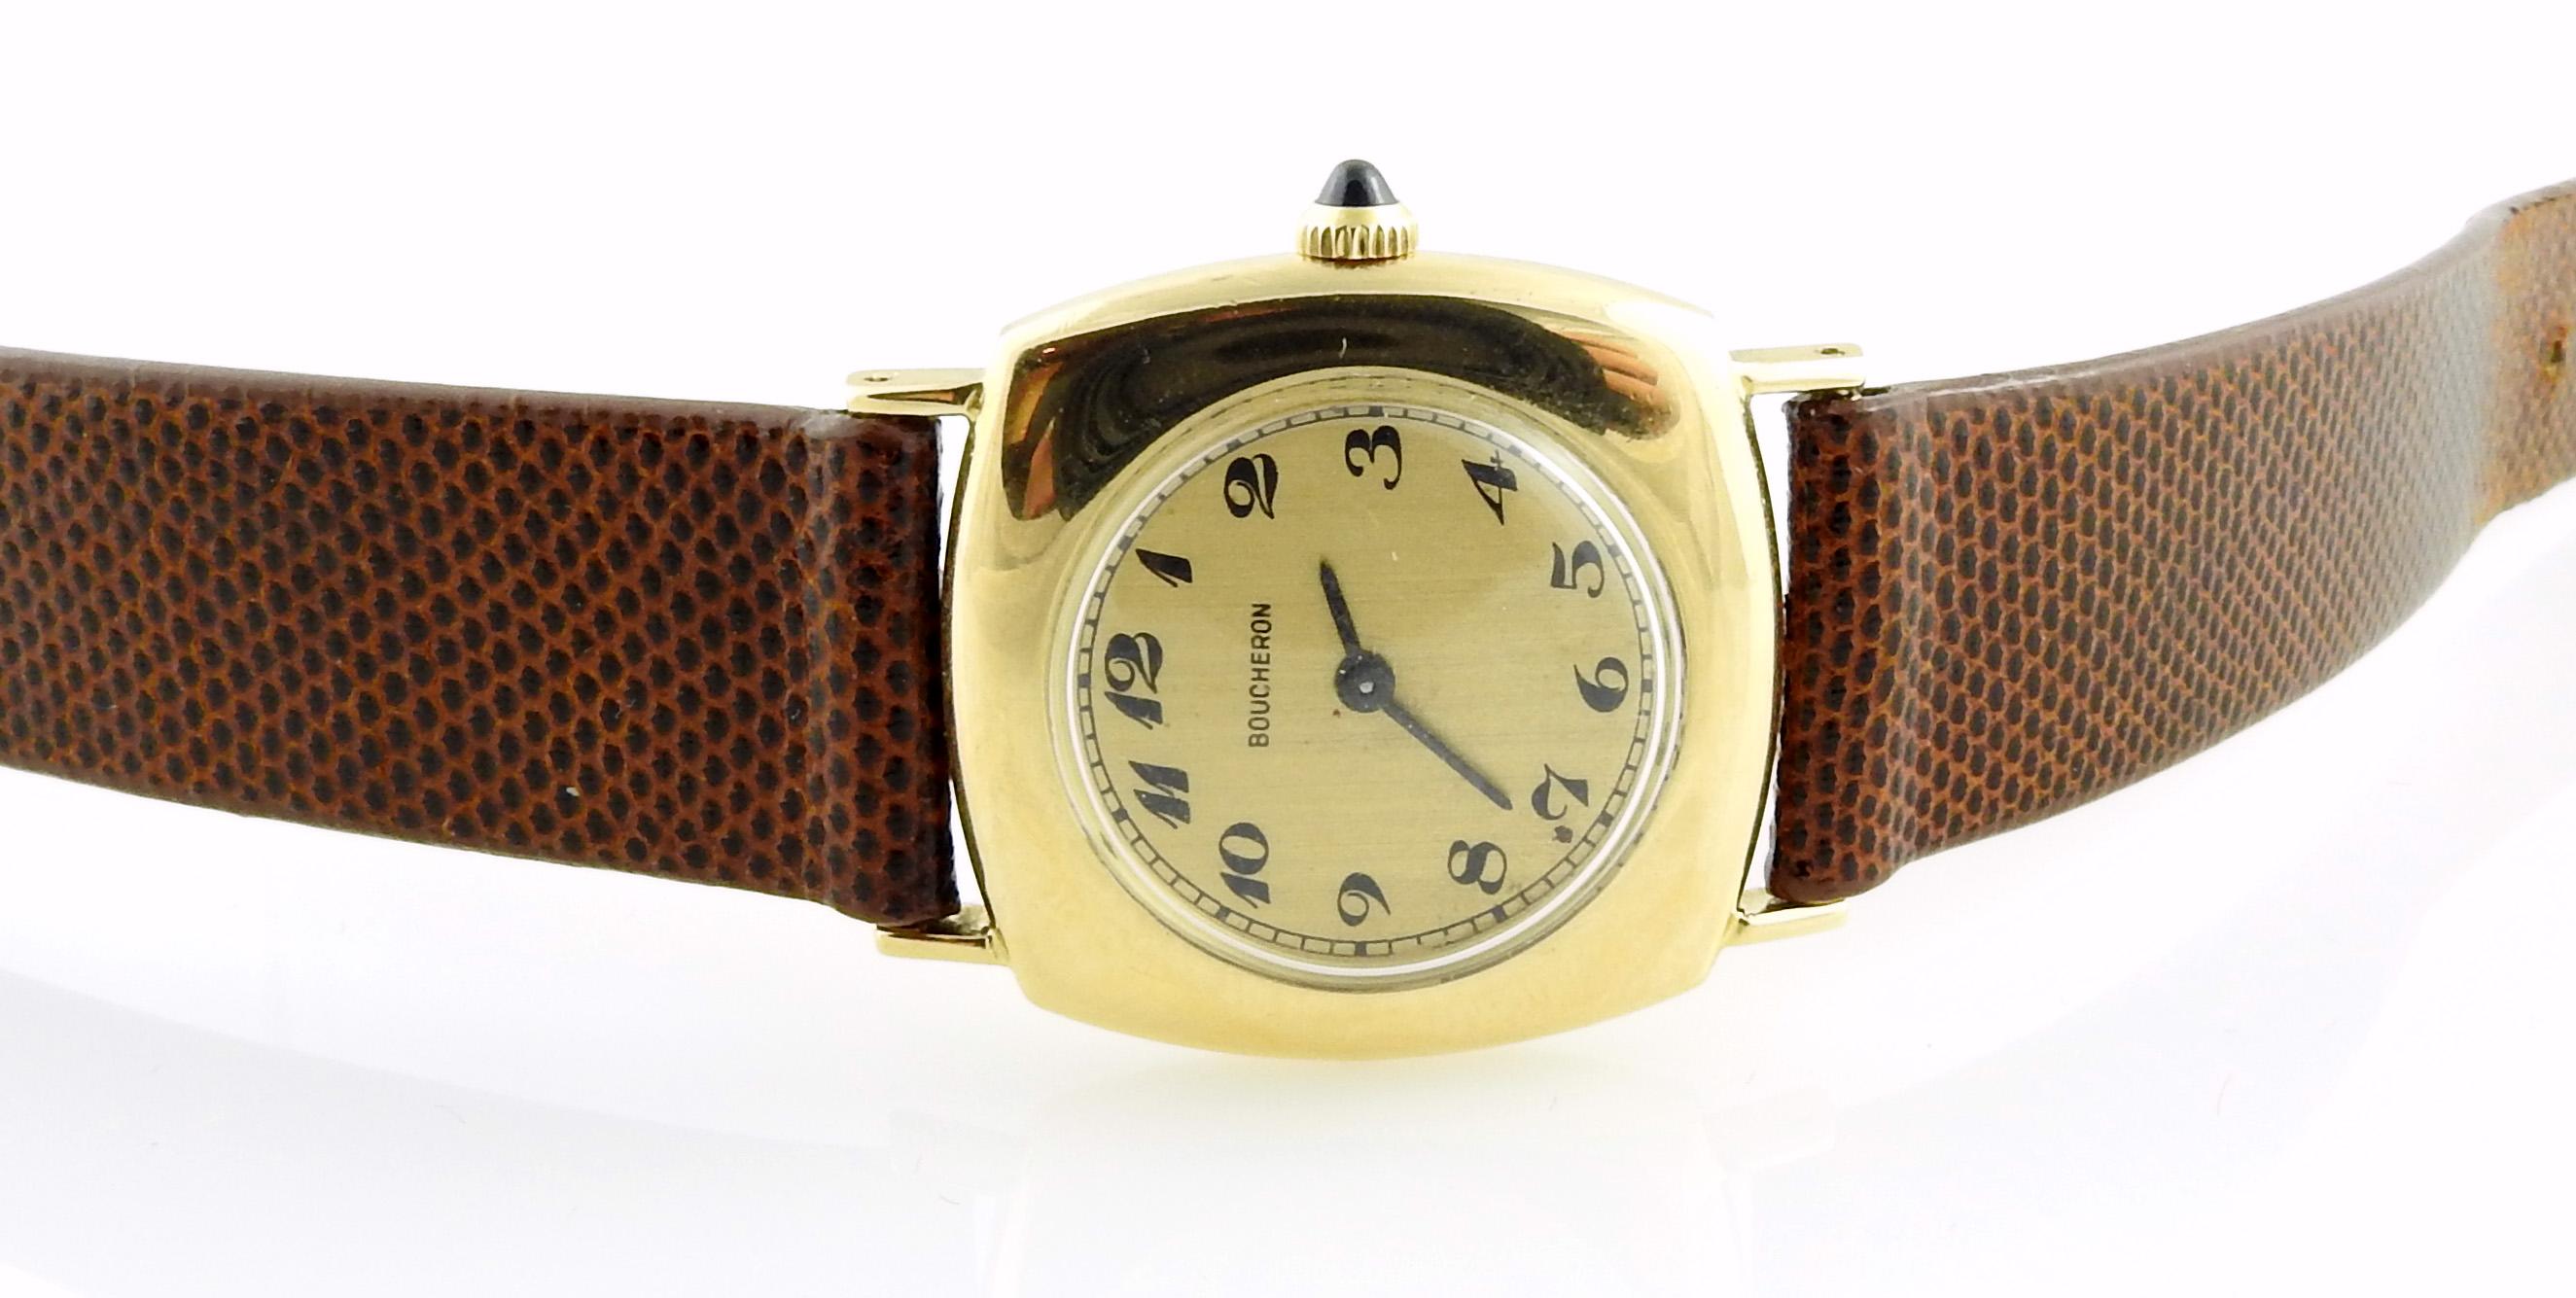 Vintage Boucheron 18K Yellow Gold Ladies Watch #80122

18K yellow gold square case with rounded corners... circular face - case has a slight nic on opposite side of crown as shown in pictures

Gold dial with black Arabic markers - case is approx.